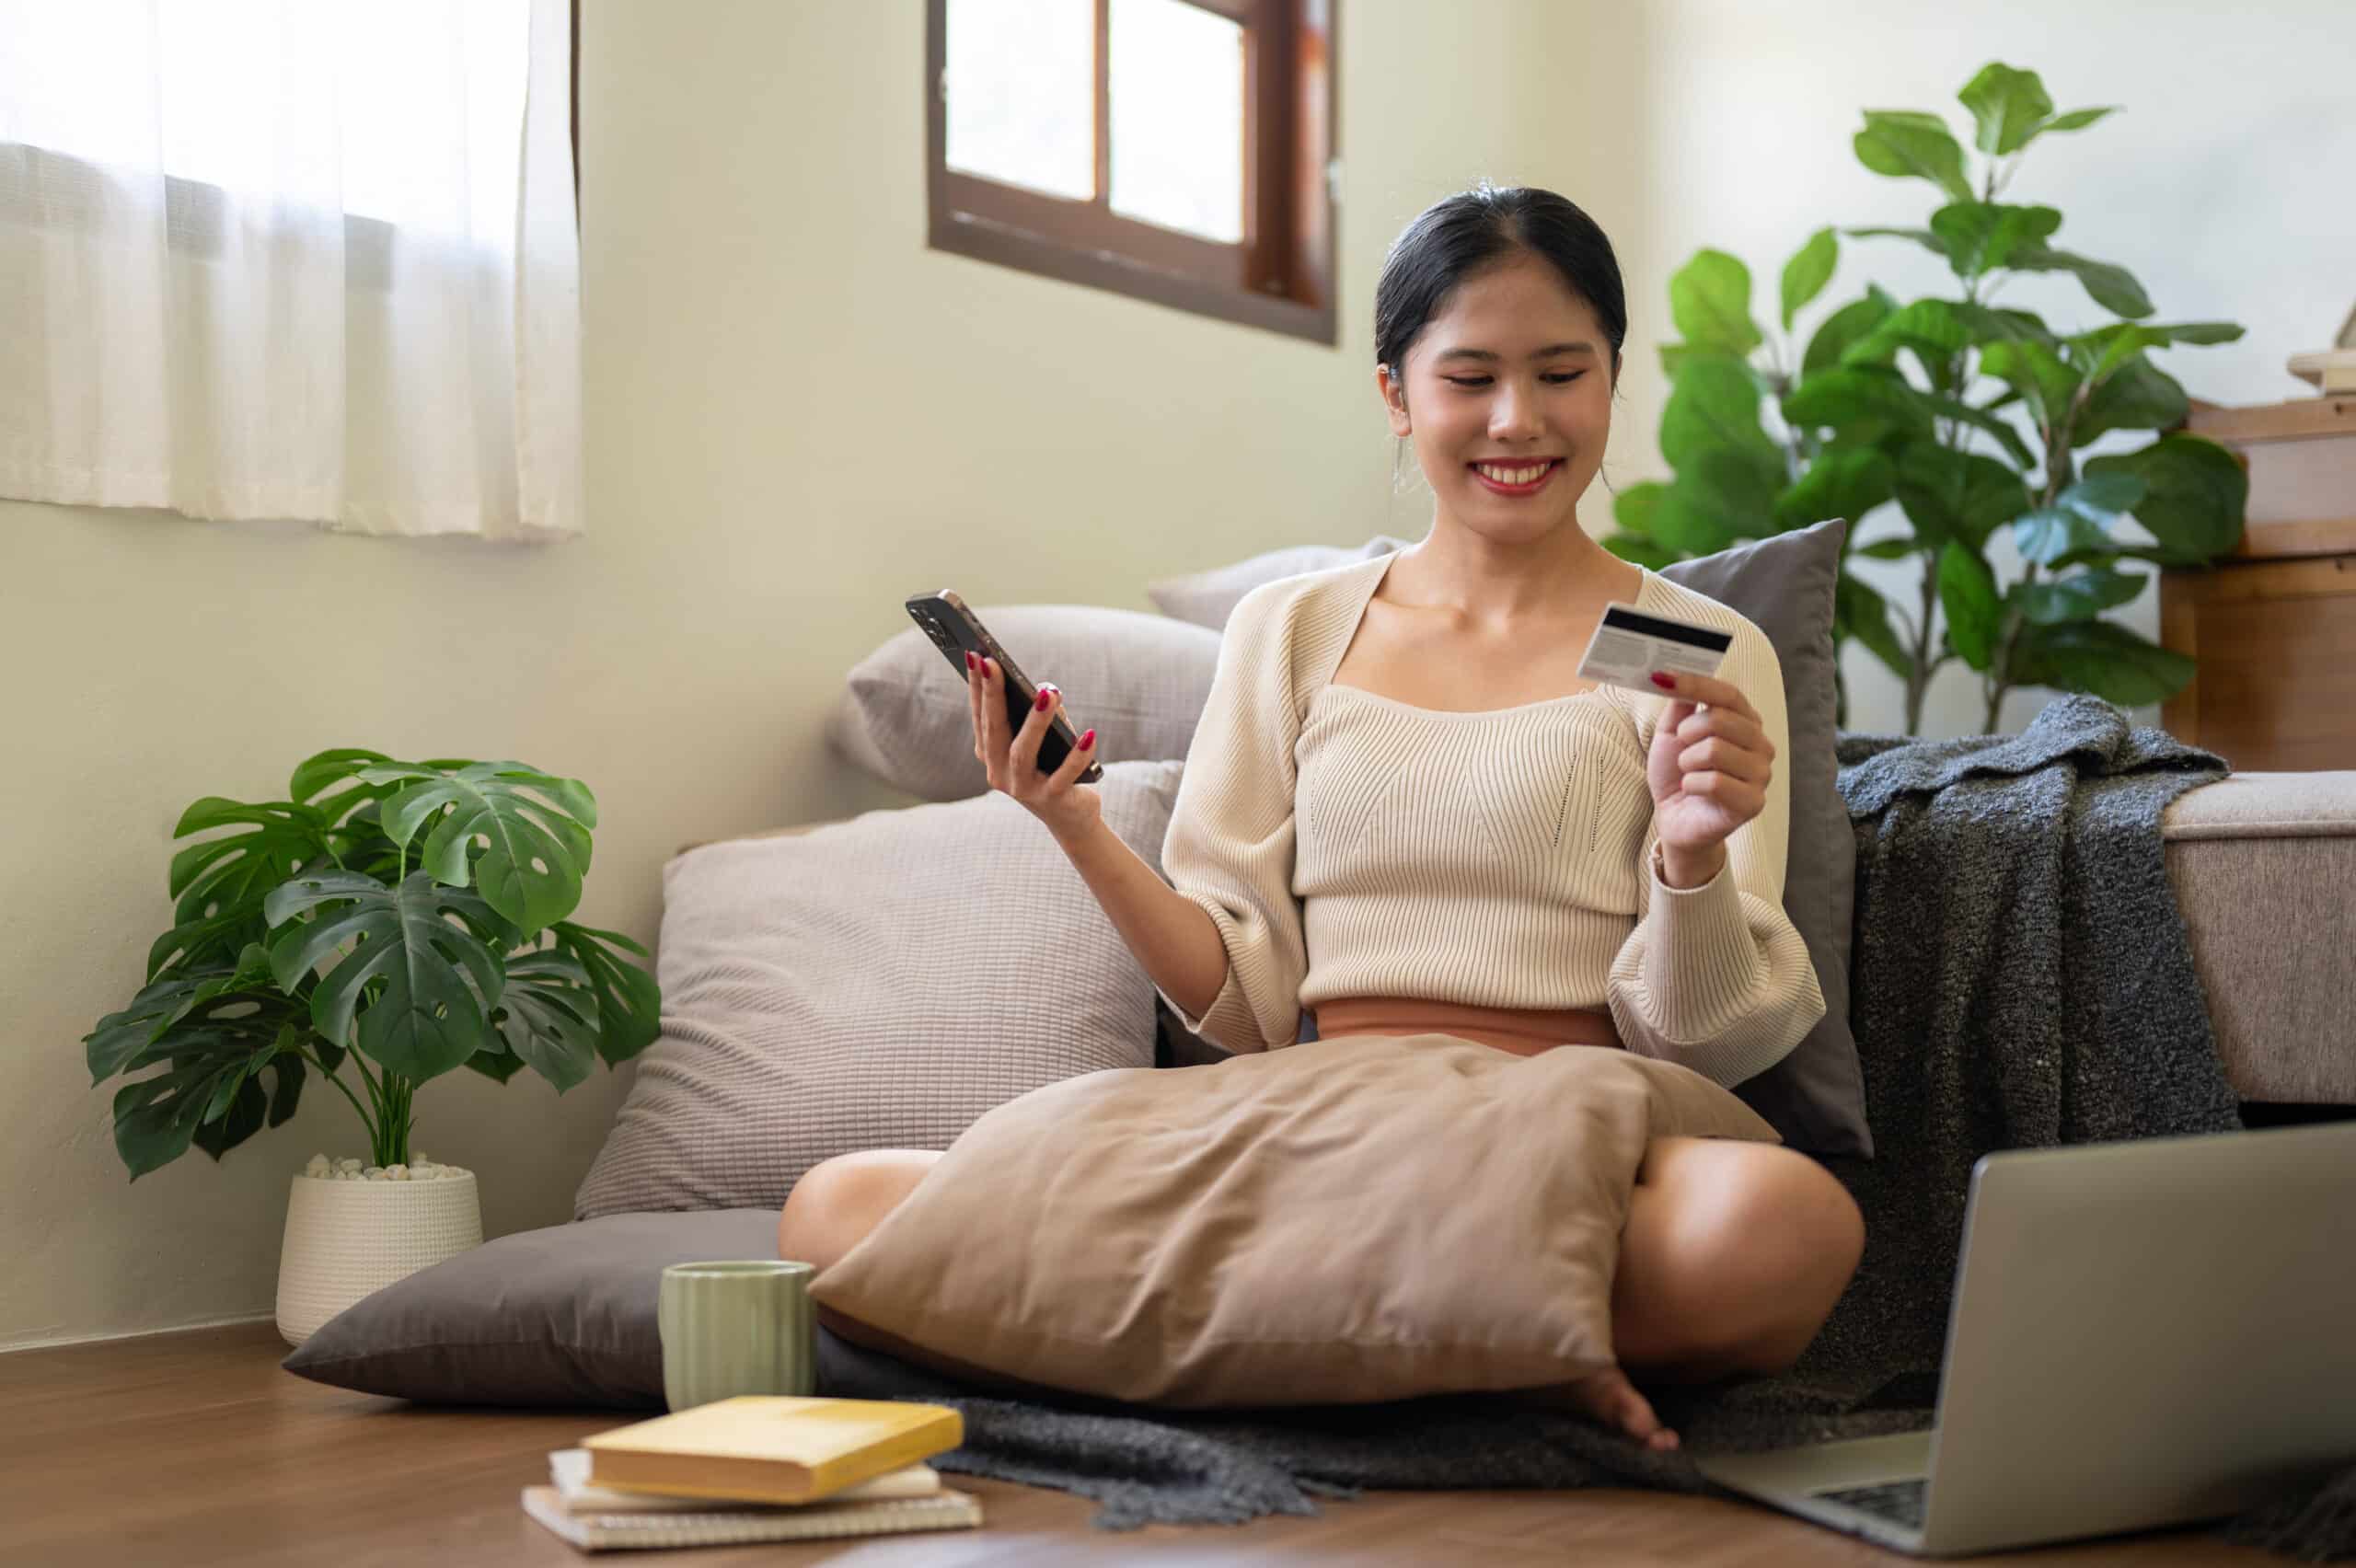 financial minimalism. Happy Asian woman is sitting on the floor beside her bed and enjoying shopping online via her phone.